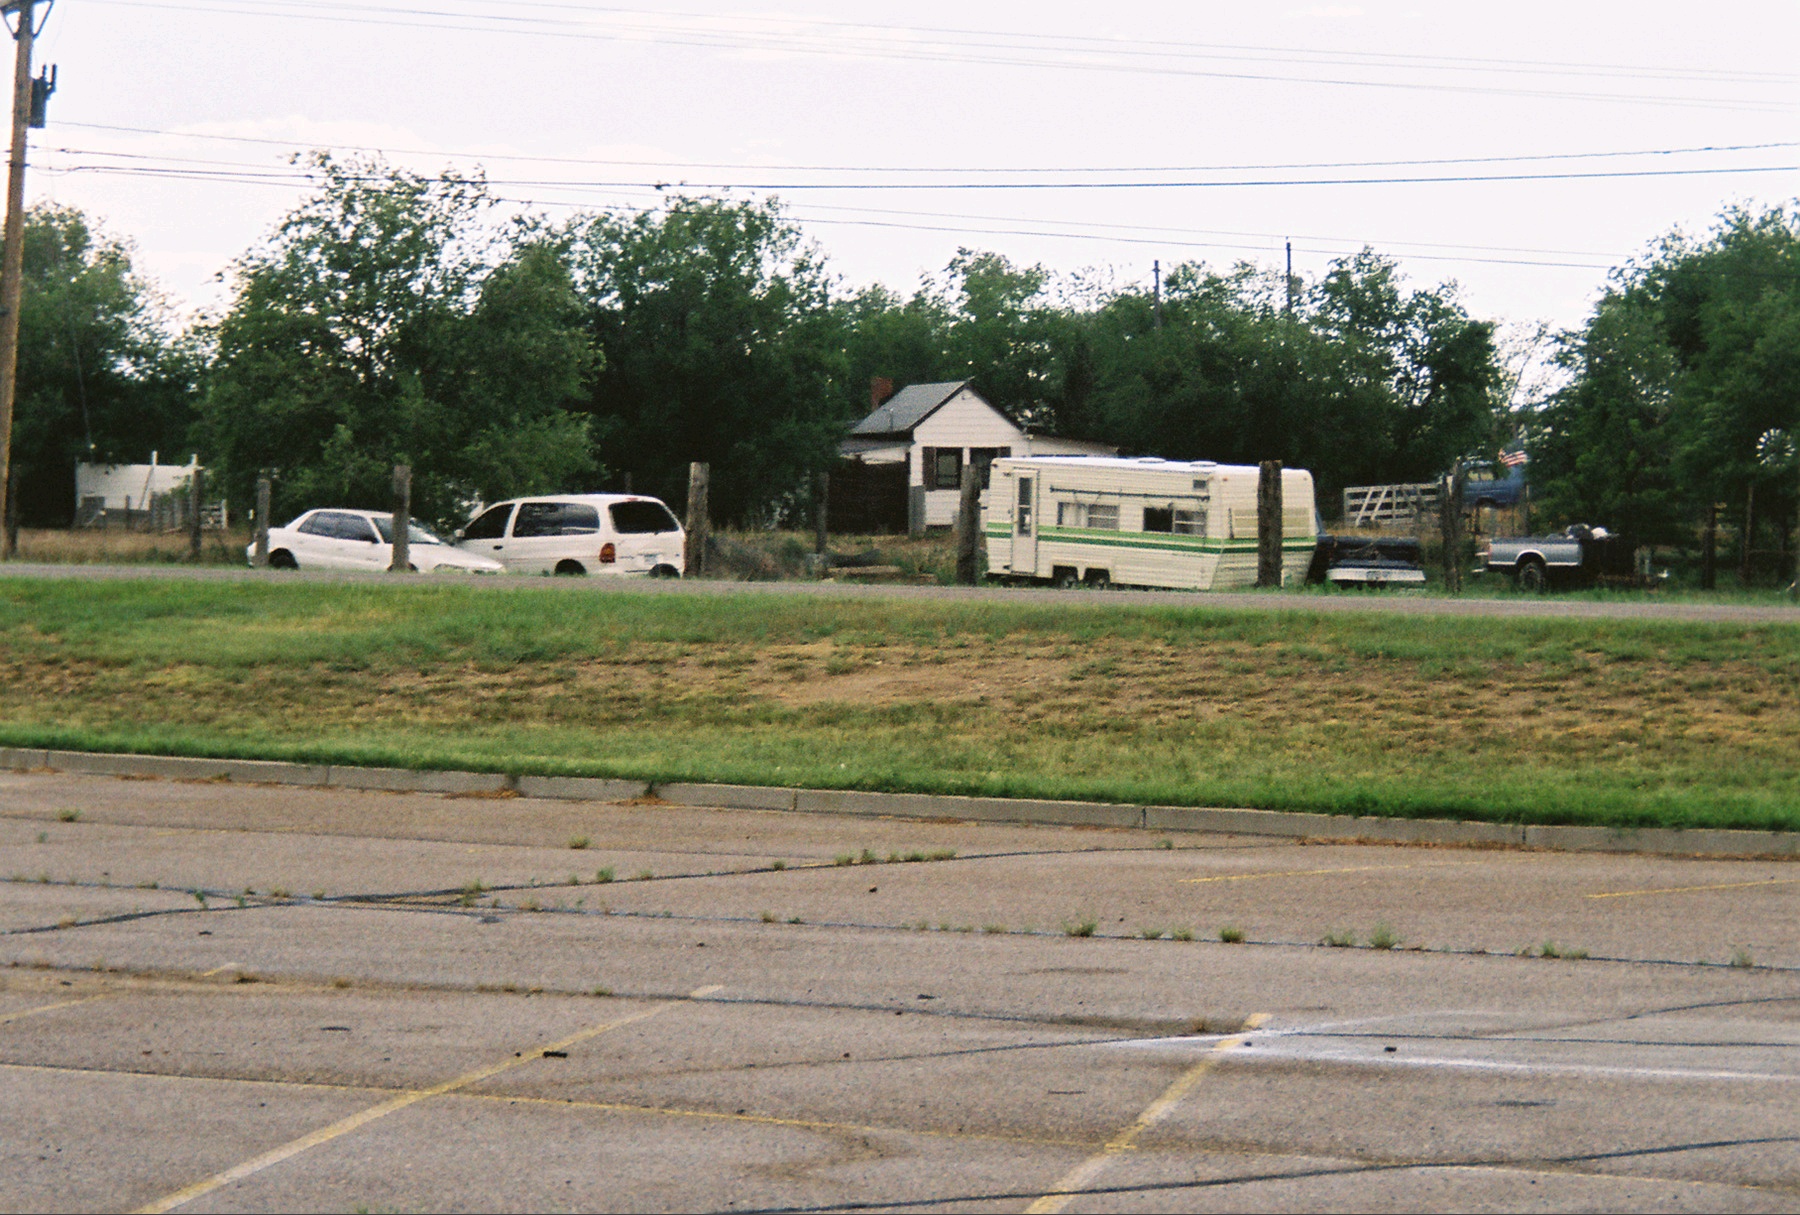 two buses and some vans are parked in a yard